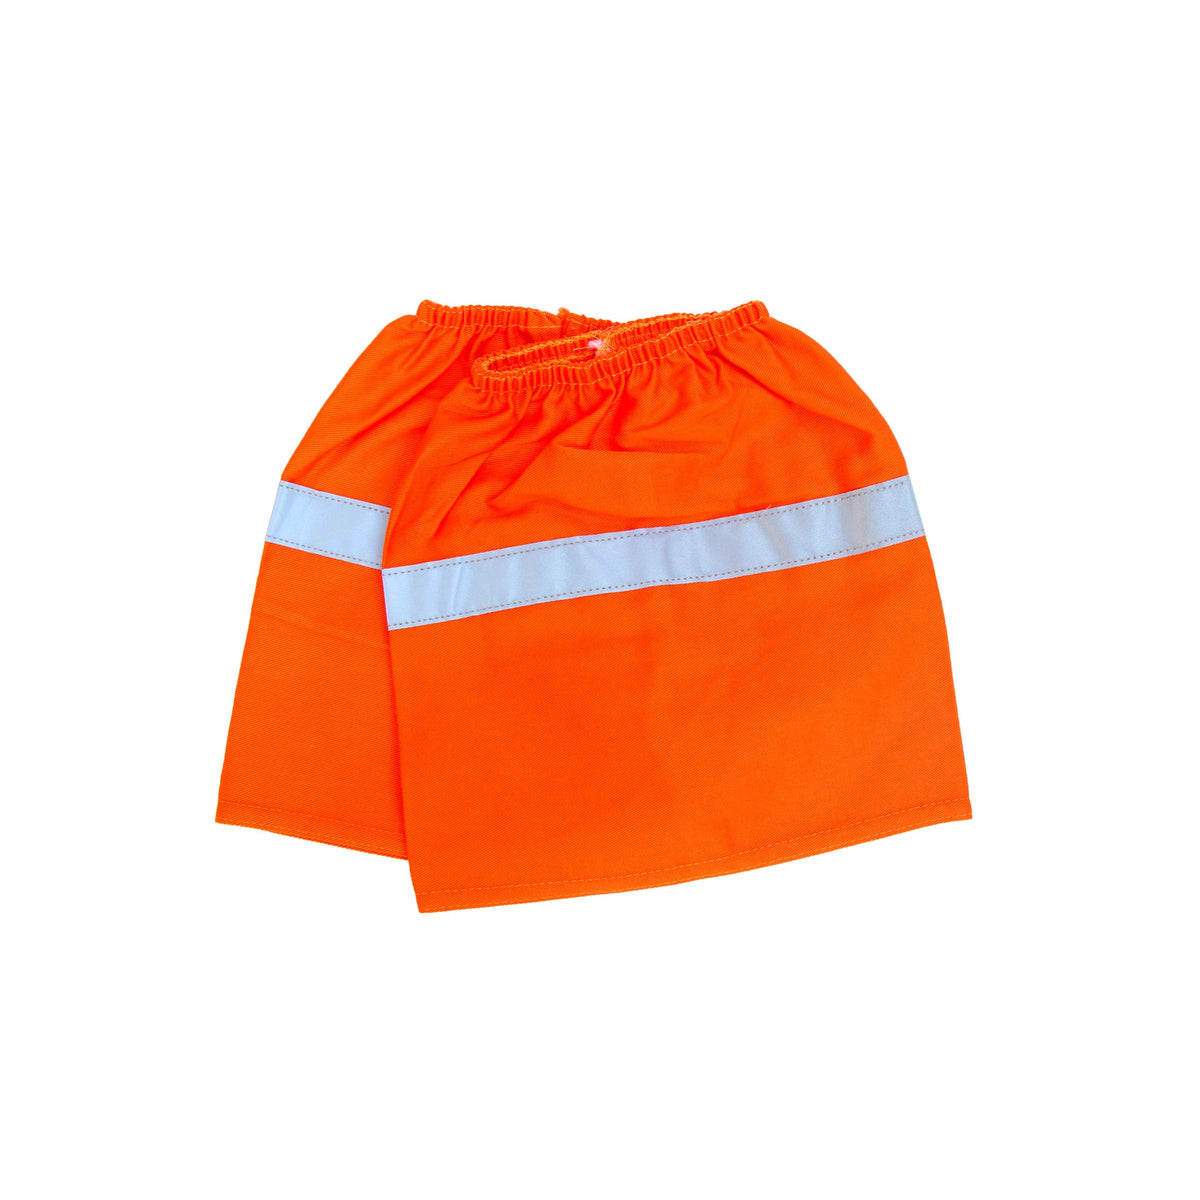 hi vis orange boot covers with reflective tape